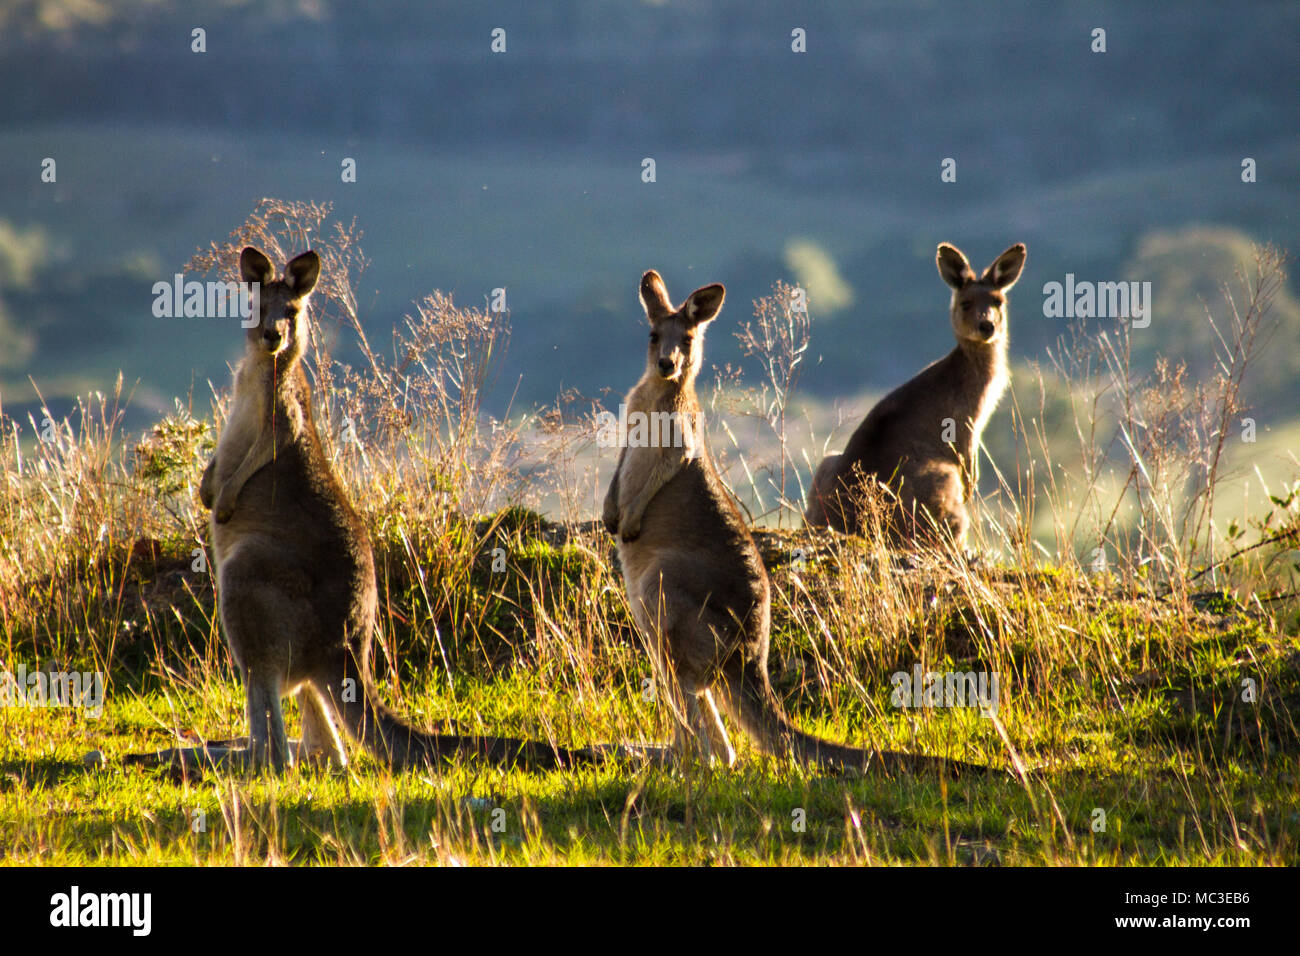 Three kangaroos standing on the edge of a mountain, backlit by the late aftenoon sun with another mountain in the background Stock Photo